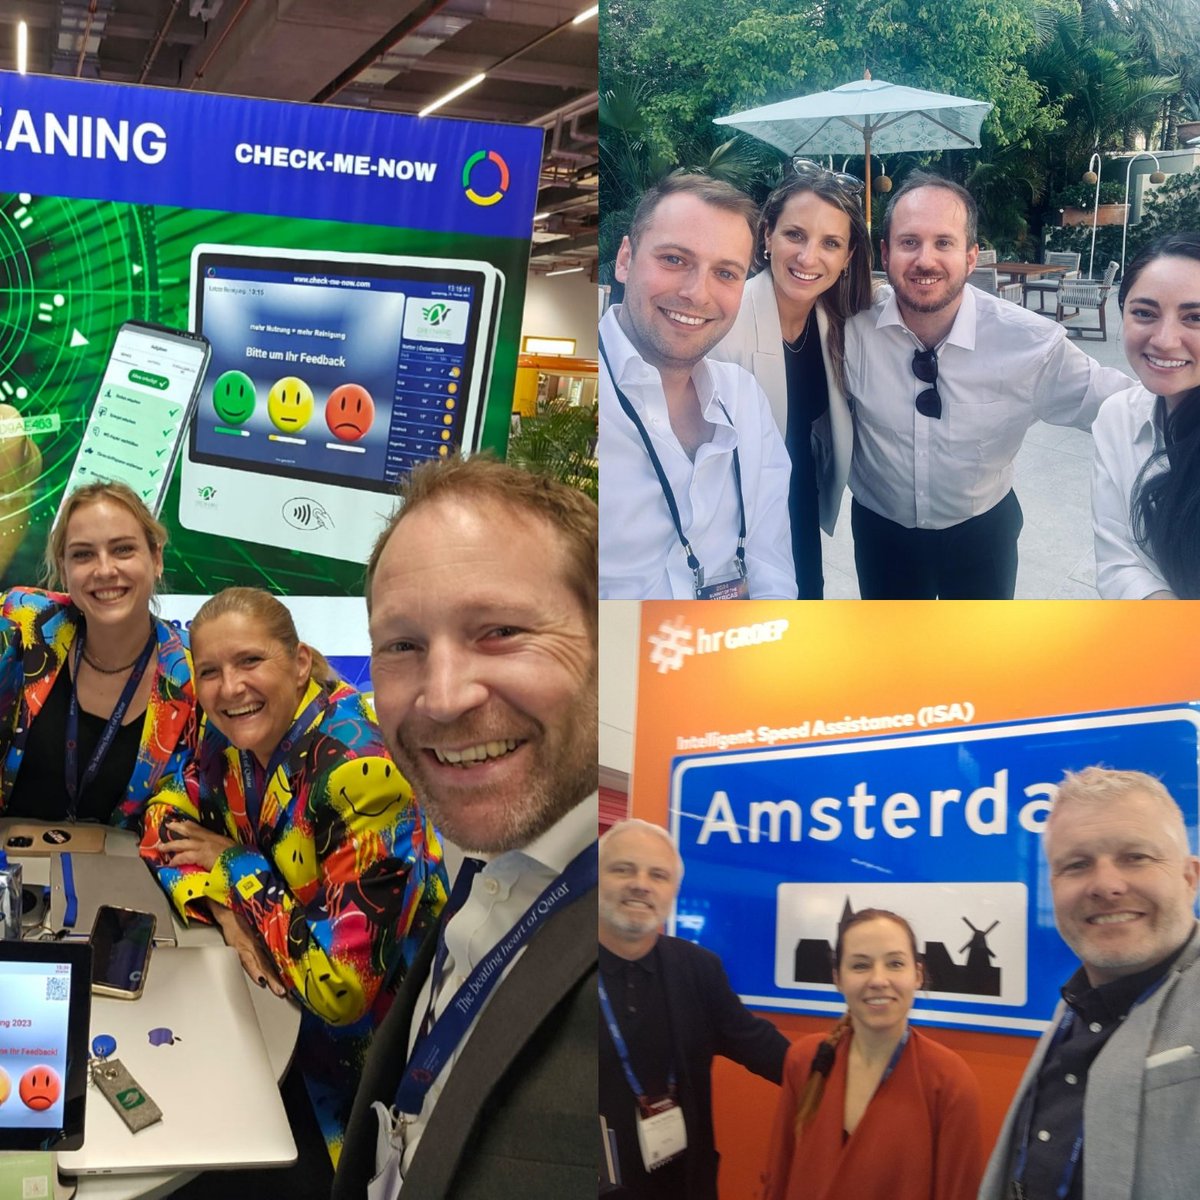 We've been busy this week with Ethos Farmers attending #PTExpoConf #PTE in #Frankfurt, #IAADFS @IAADFS #SummitofTheAmericas in #PalmBeach and #parkex in #Amsterdam